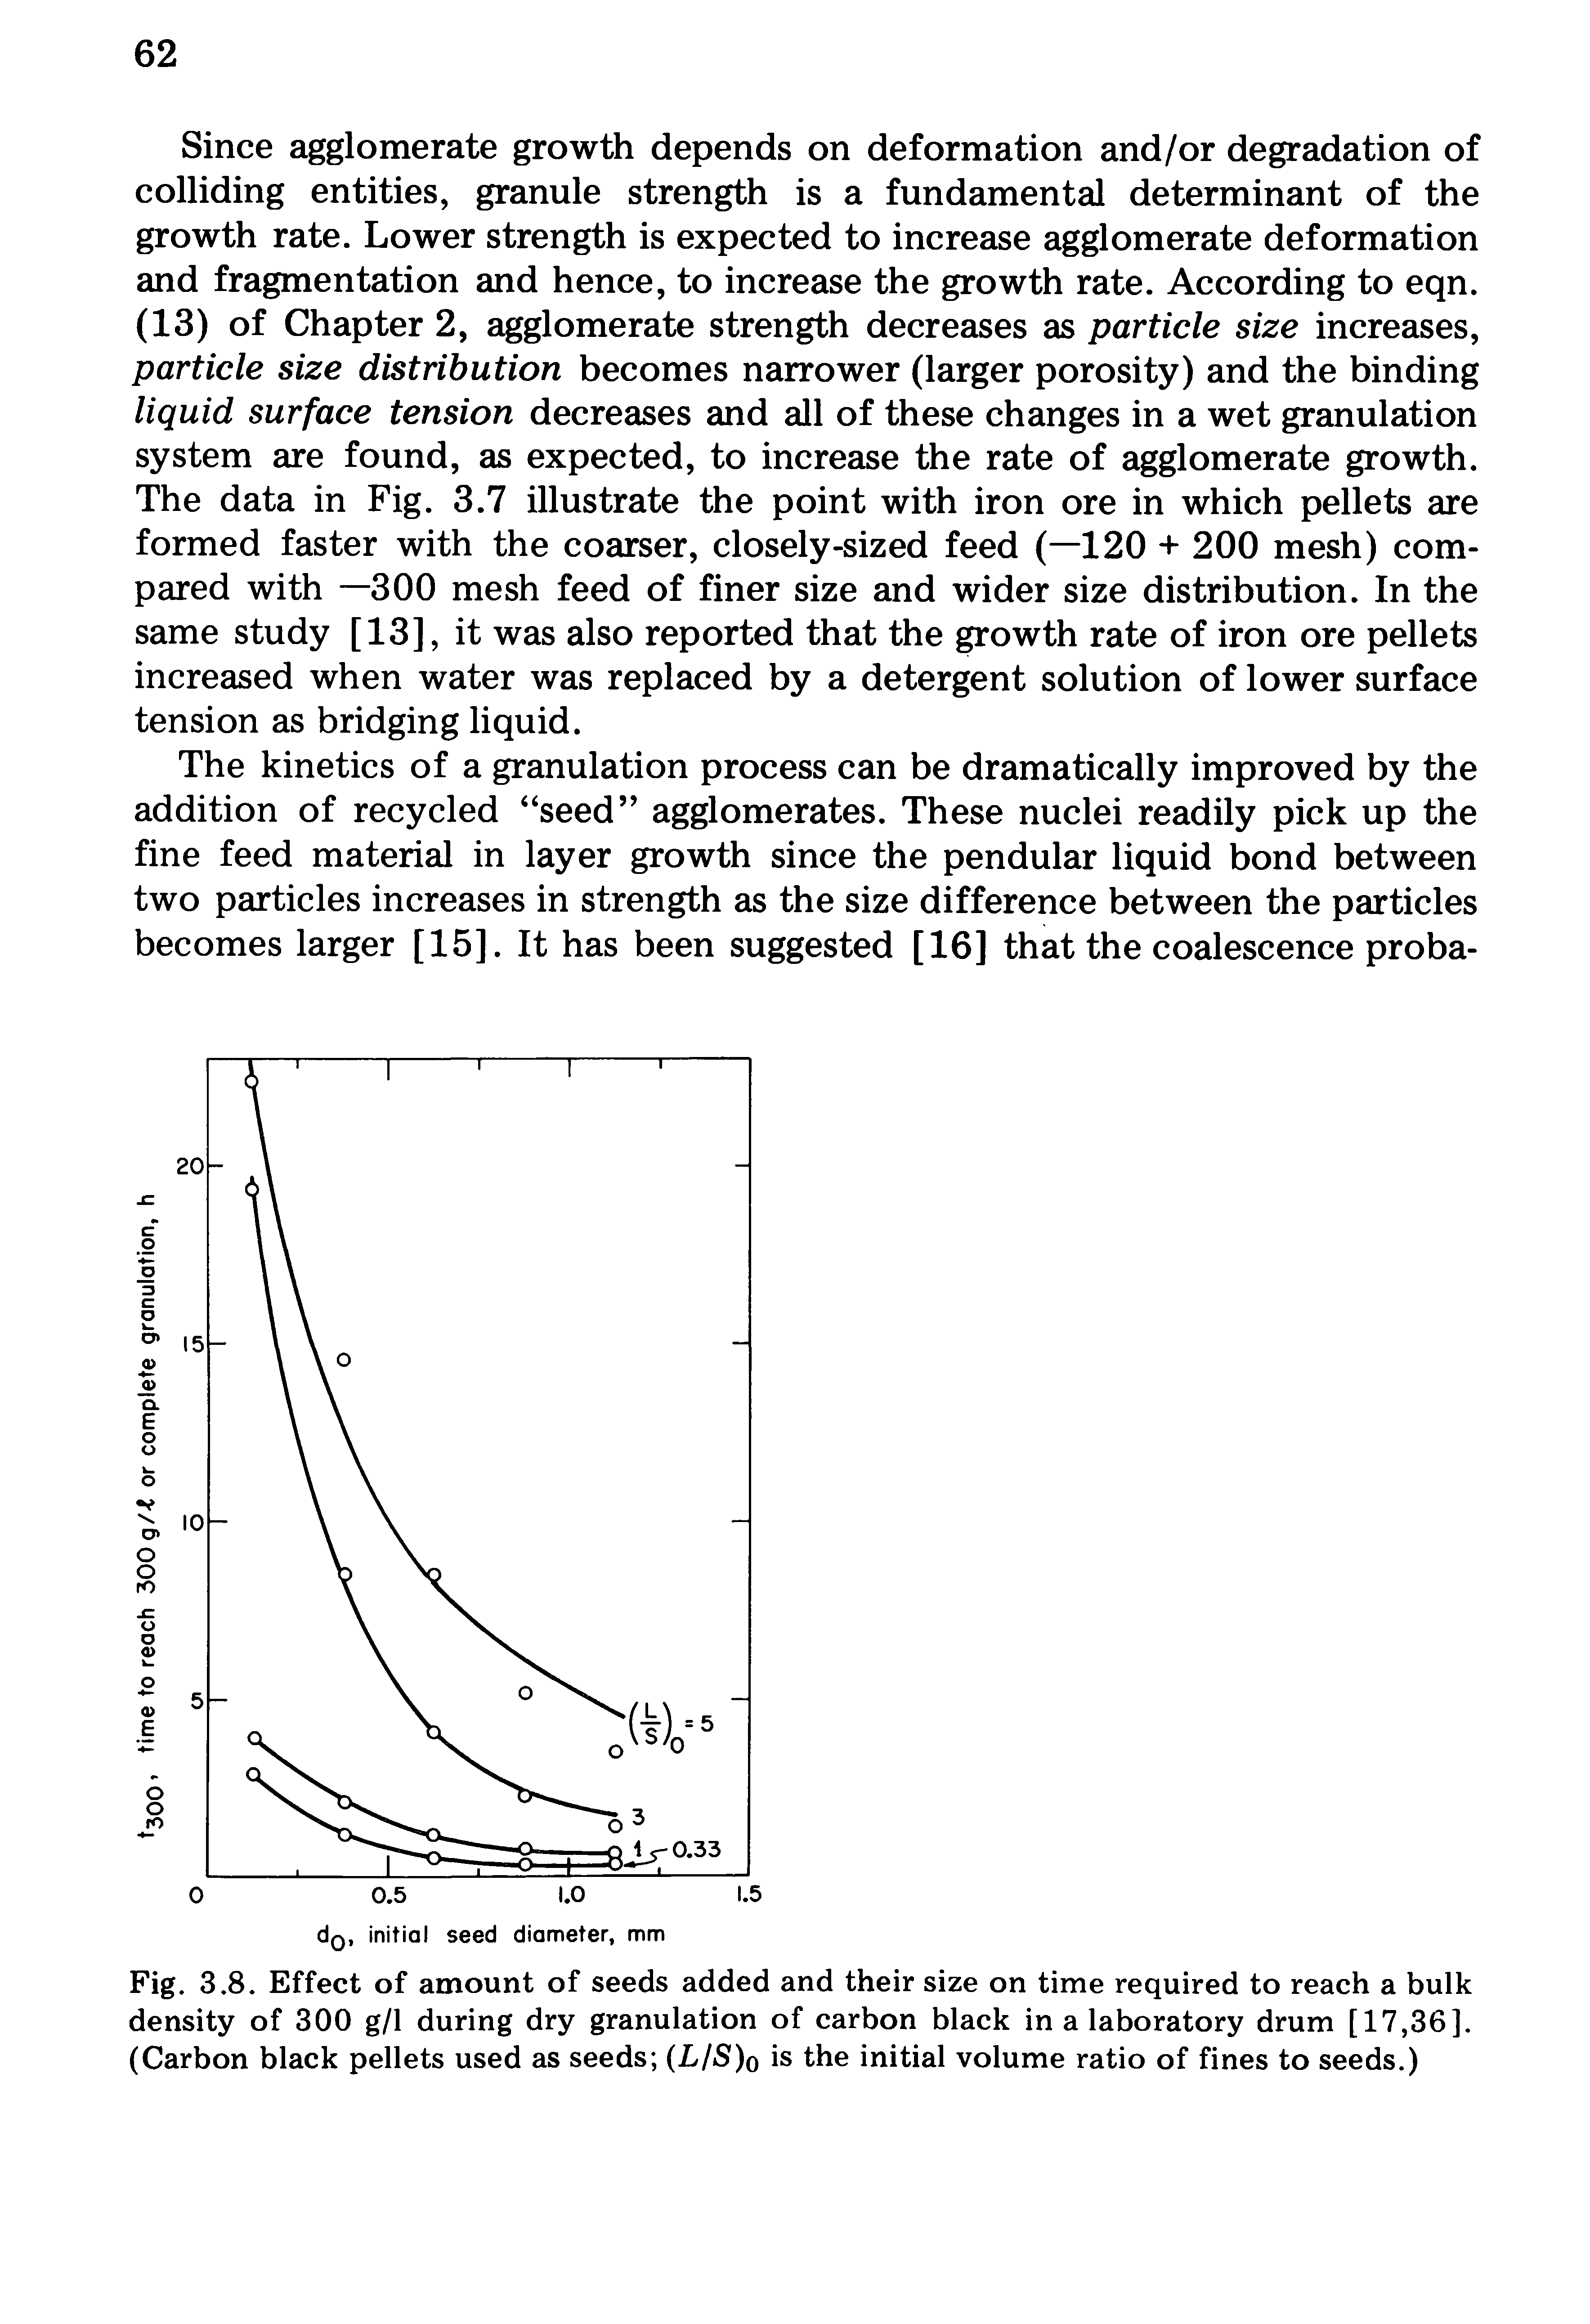 Fig. 3.8. Effect of amount of seeds added and their size on time required to reach a bulk density of 300 g/1 during dry granulation of carbon black in a laboratory drum [17,36]. (Carbon black pellets used as seeds (L/S)o is the initial volume ratio of fines to seeds.)...